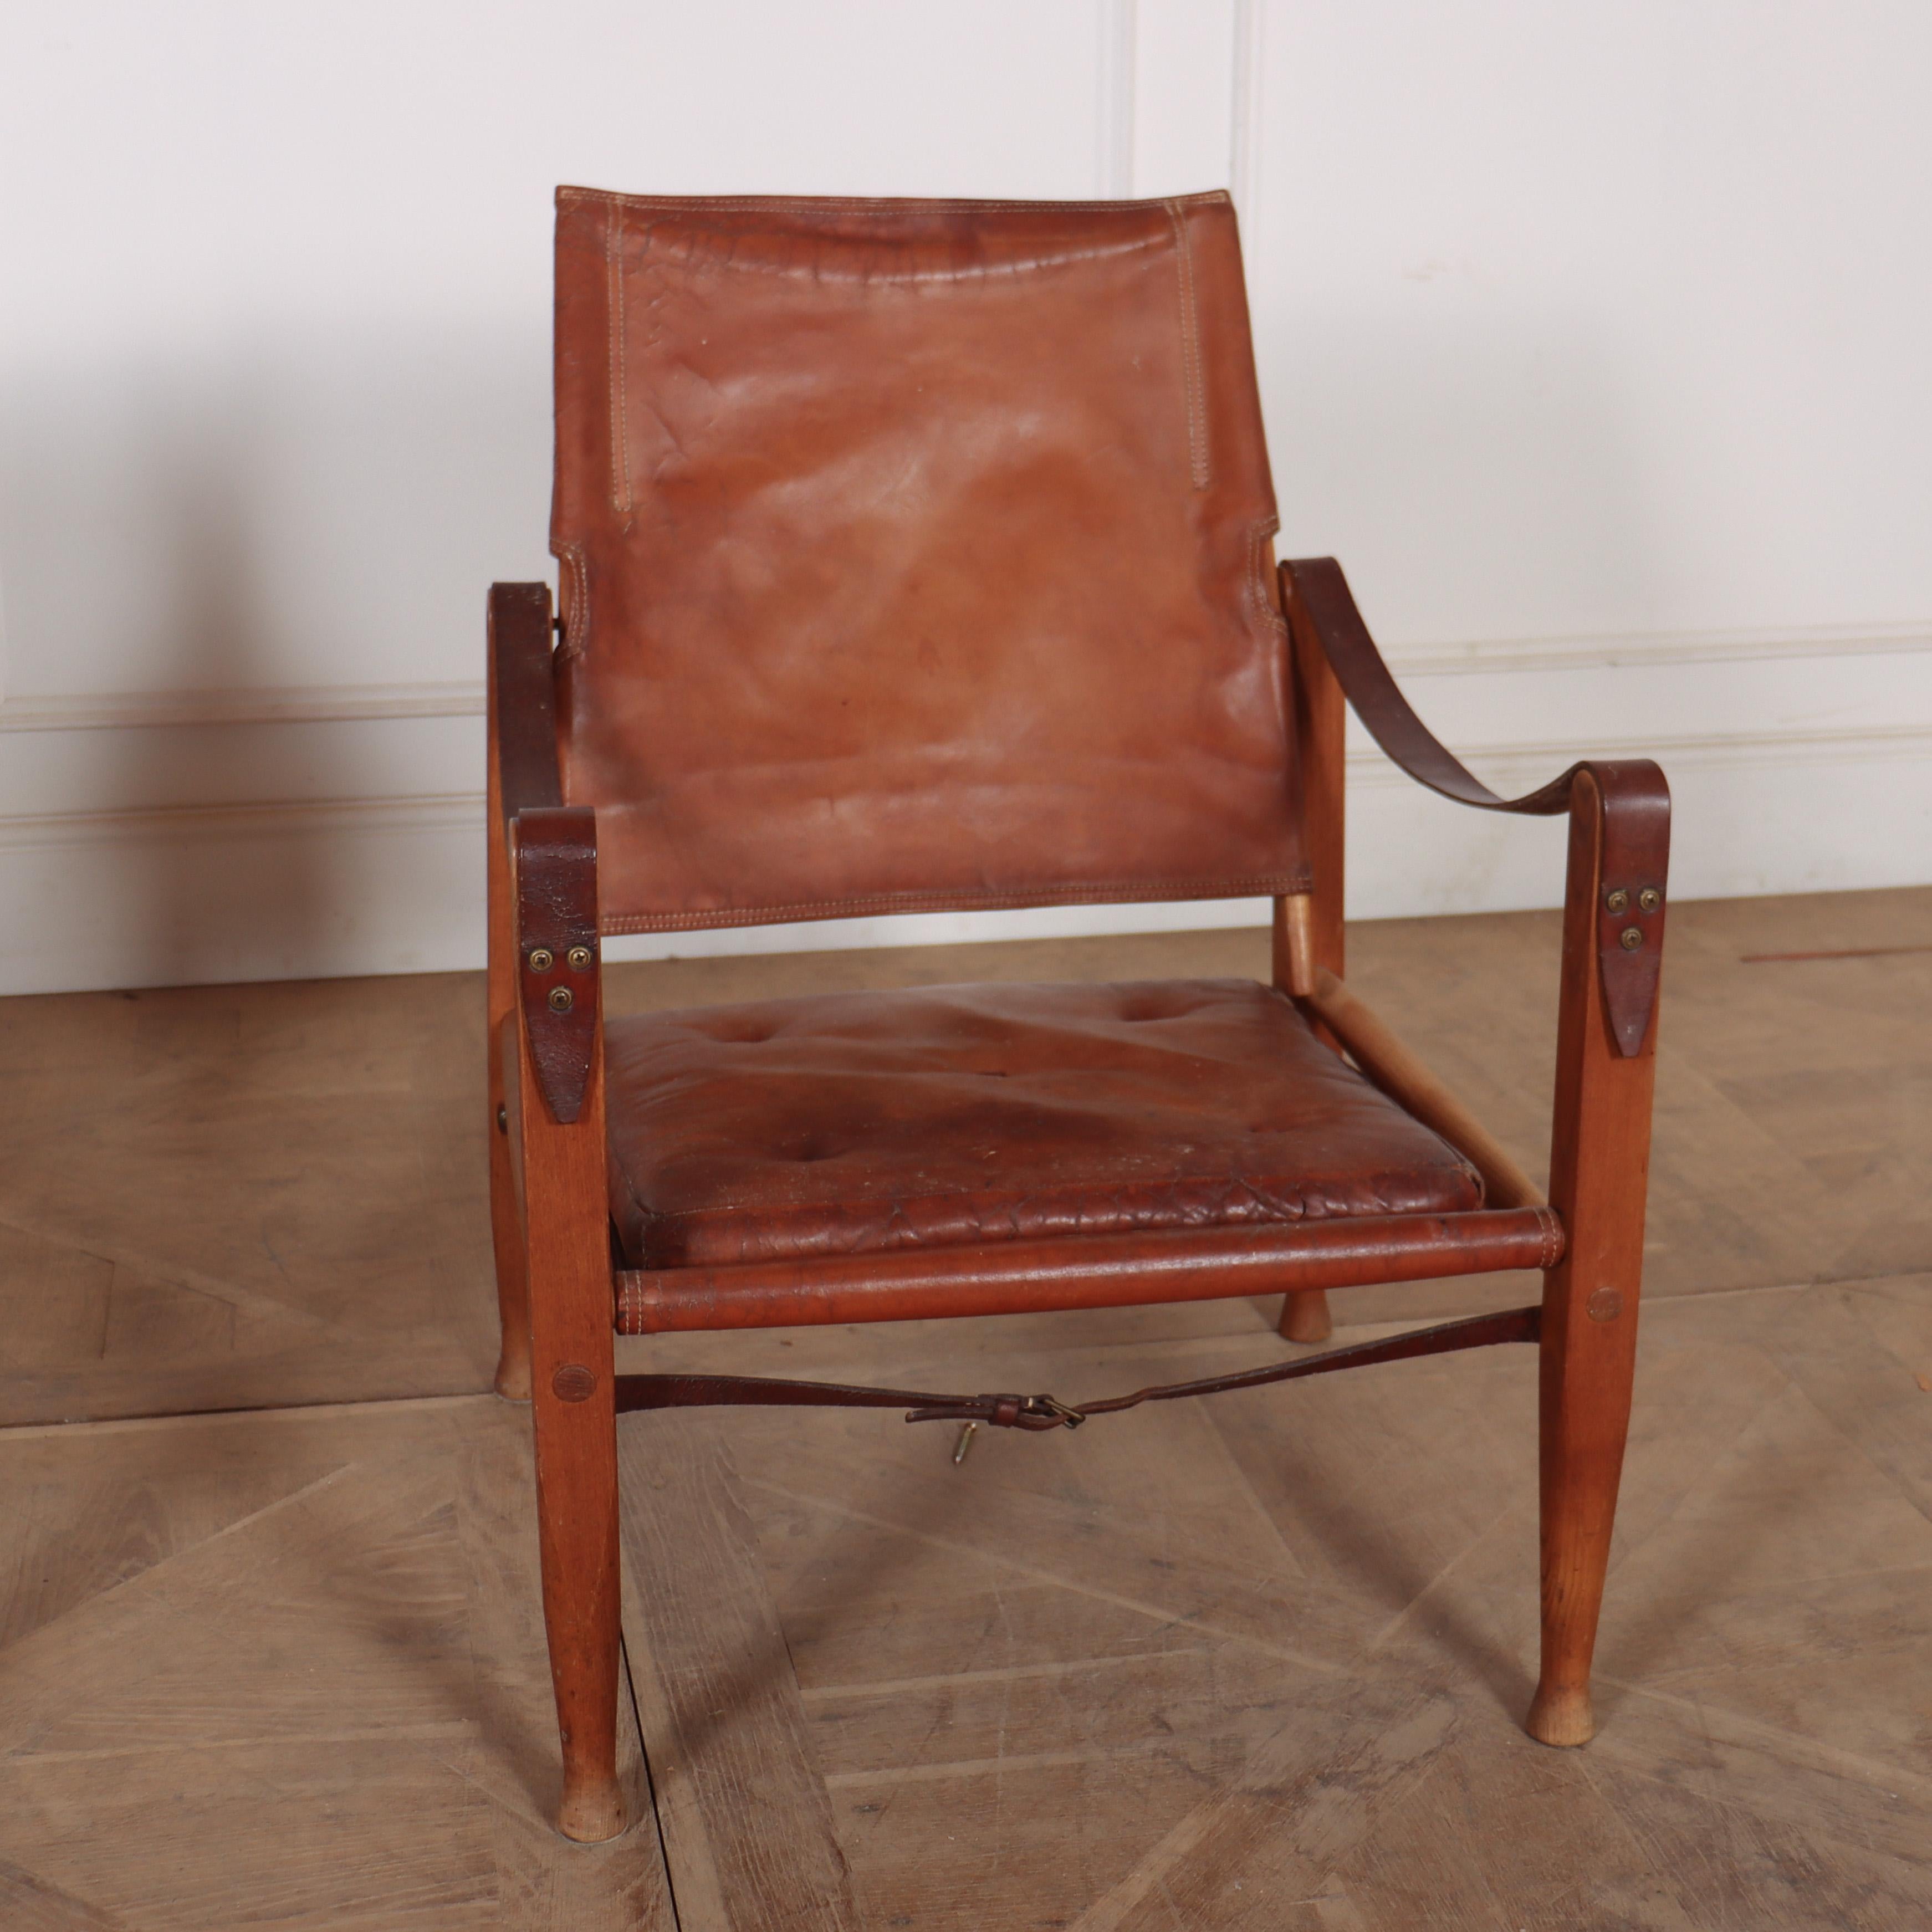 Pair of 20th C Kaare Klint for Rud Rasmussen Swedish leather safari chairs.

Seat height is 12.25